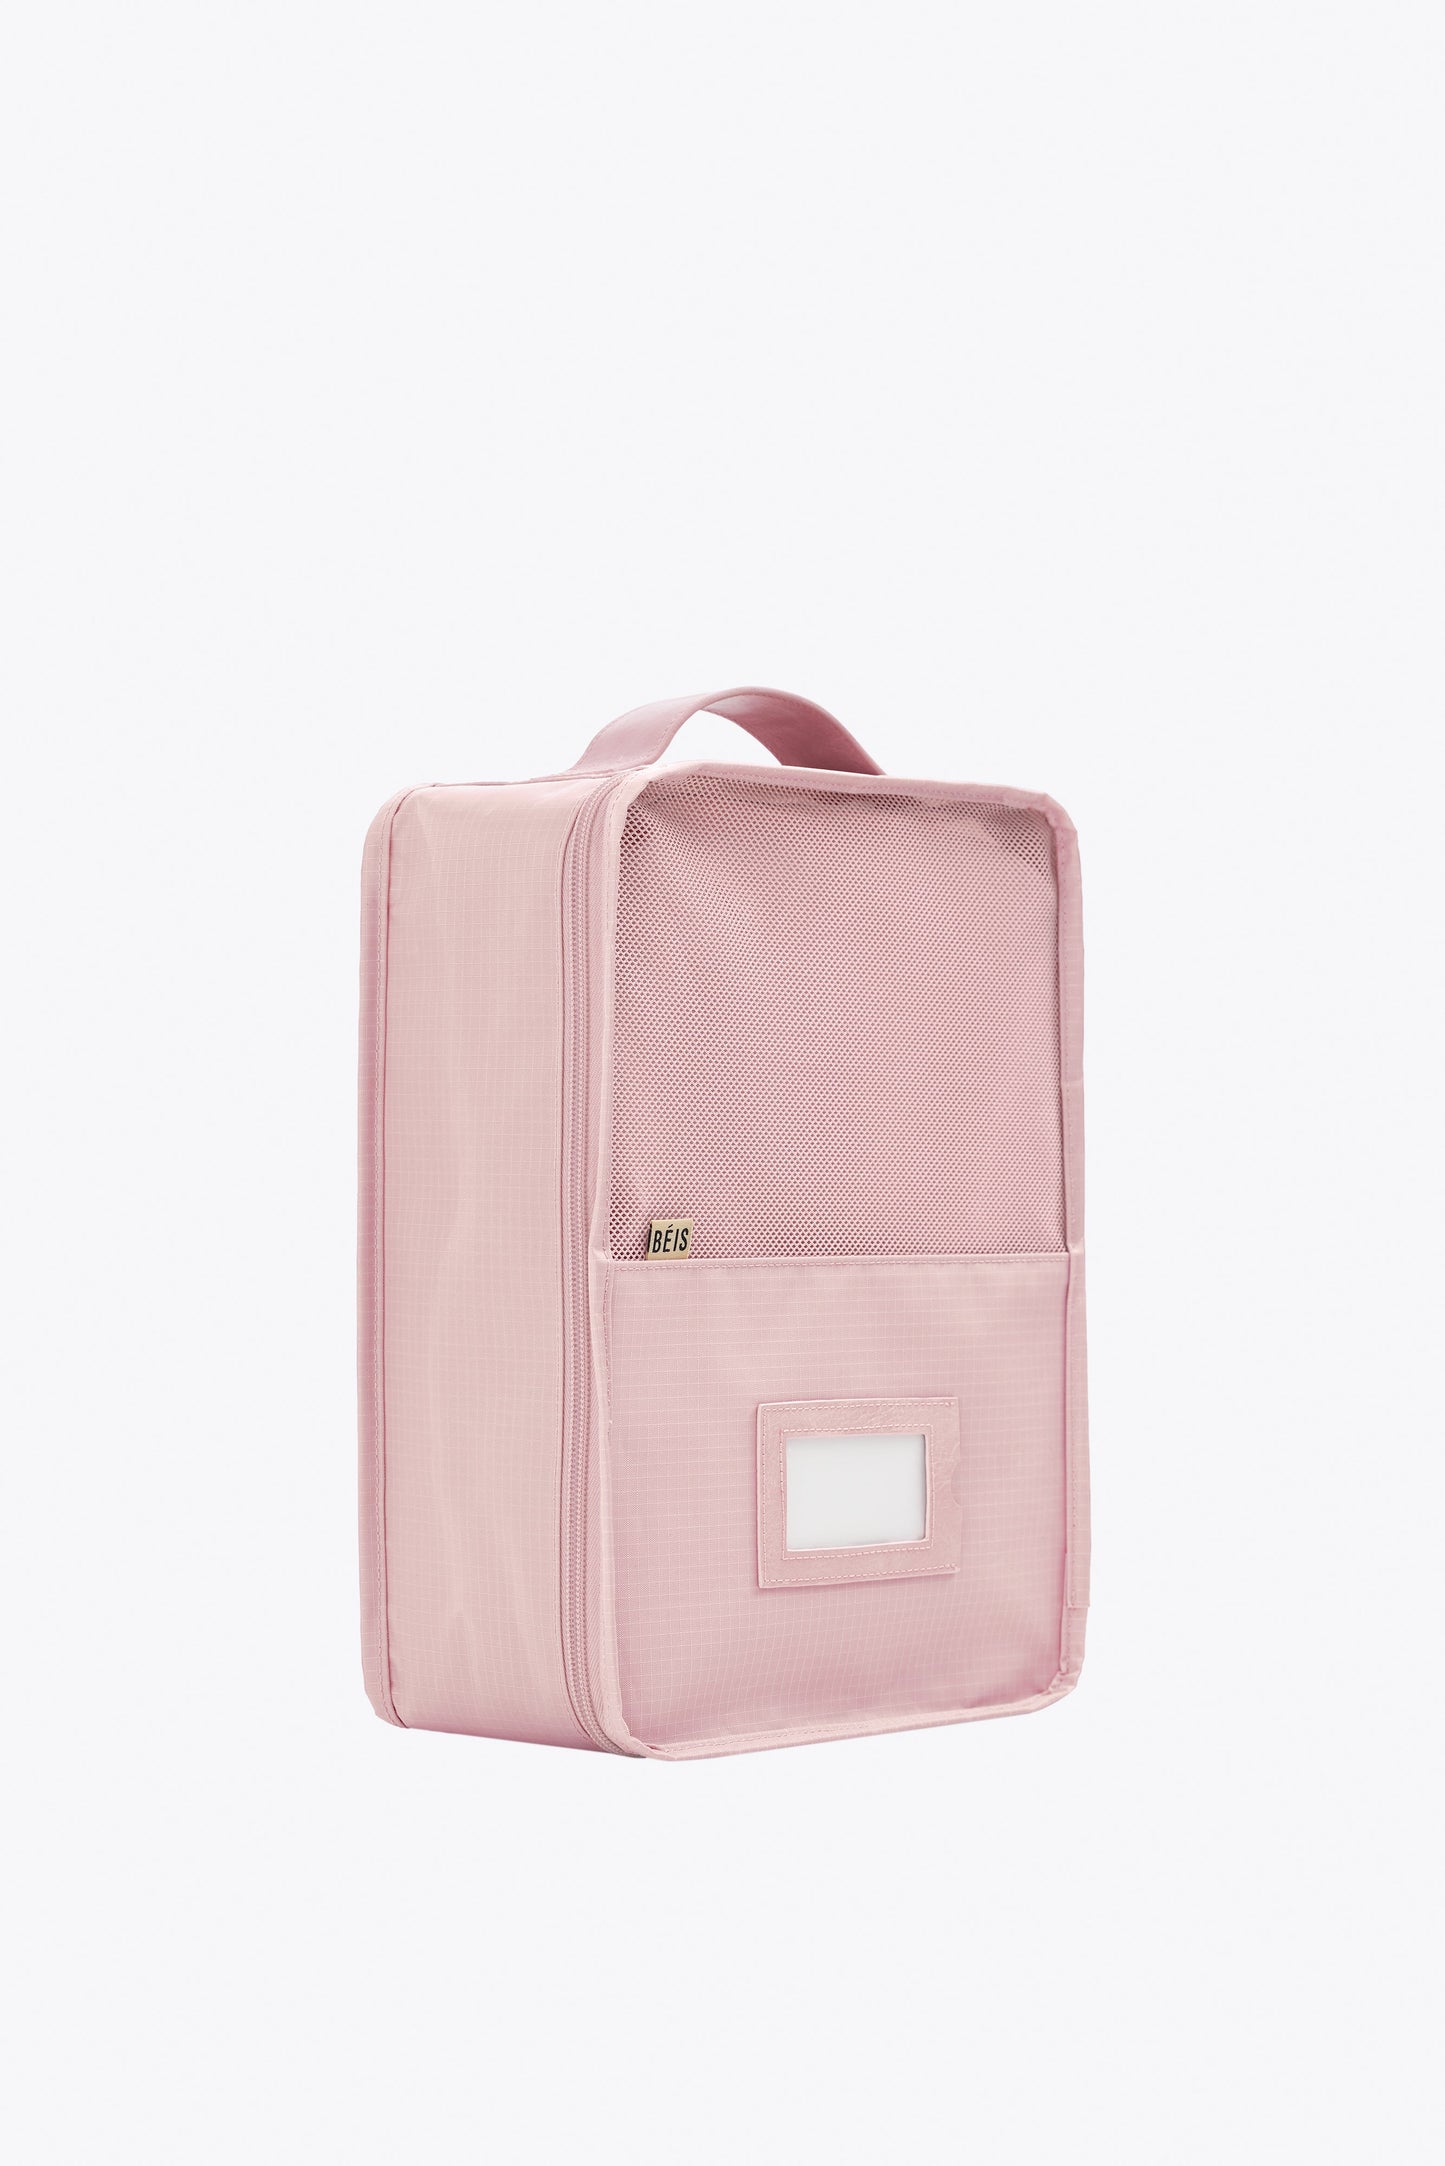 The Packing Cubes in Atlas Pink